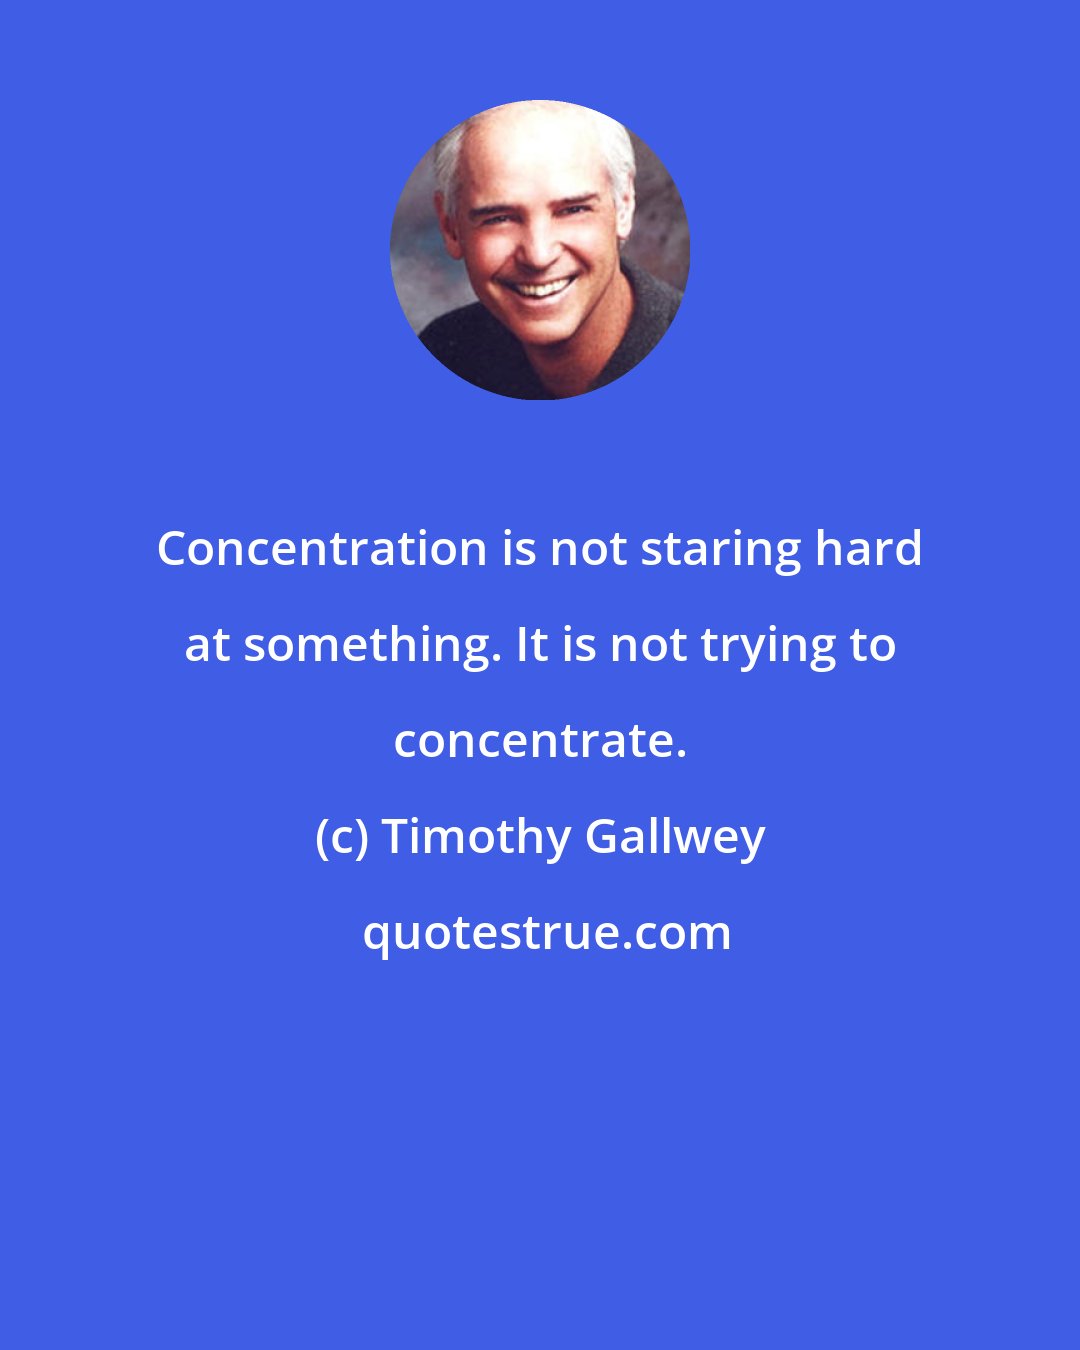 Timothy Gallwey: Concentration is not staring hard at something. It is not trying to concentrate.